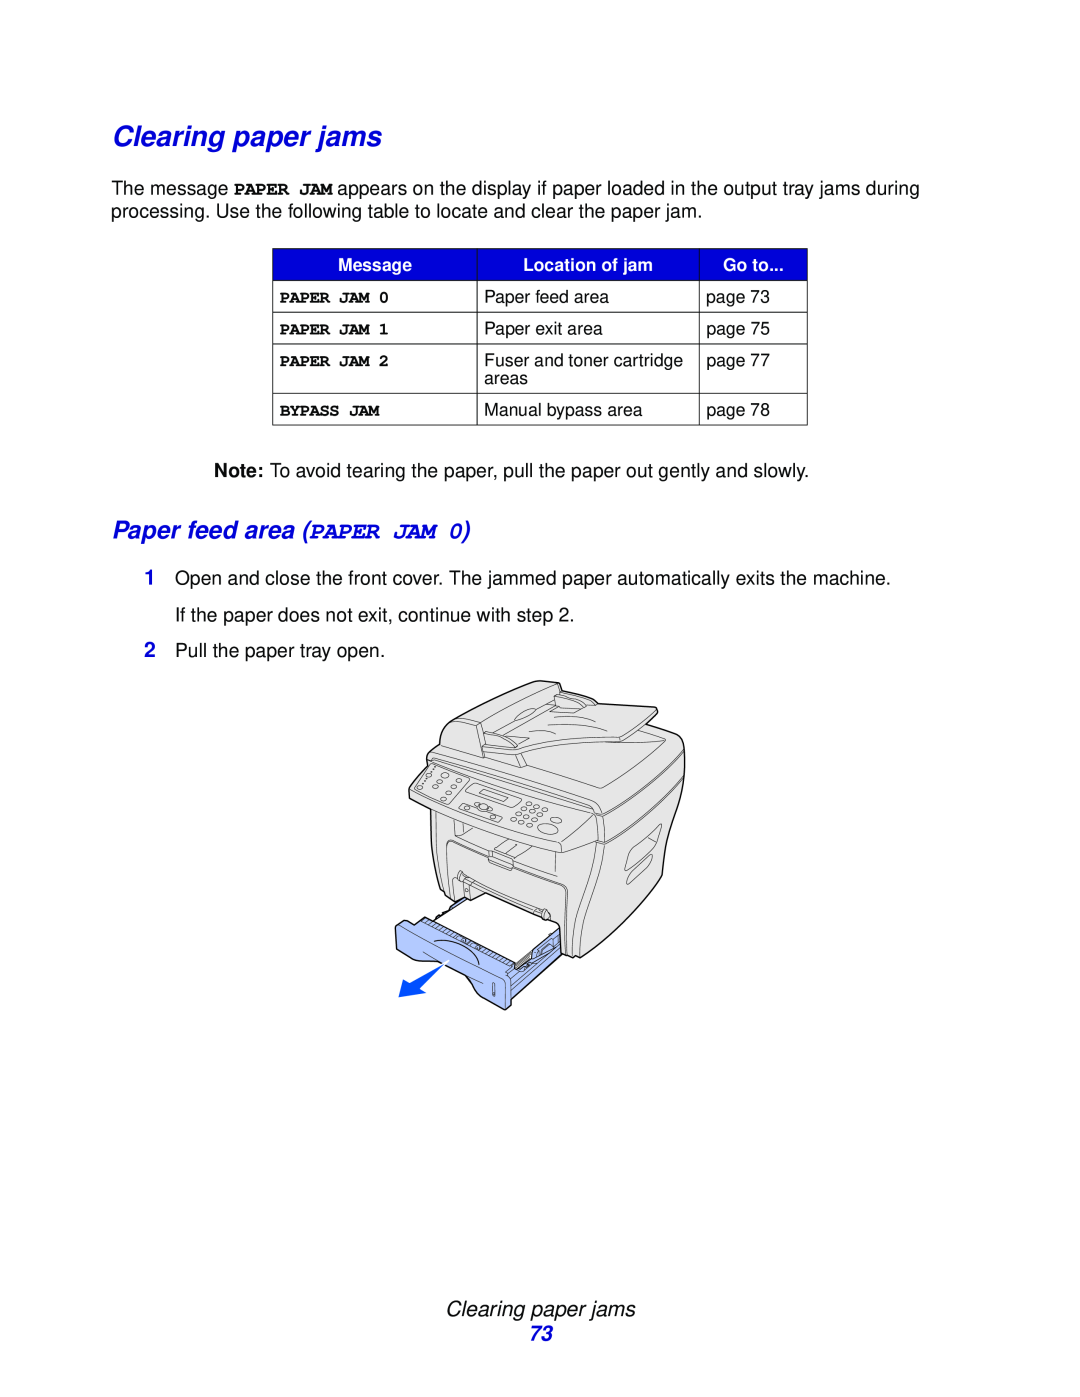 Lexmark X215 MFP manual Clearing paper jams, Paper feed area PAPER JAM 